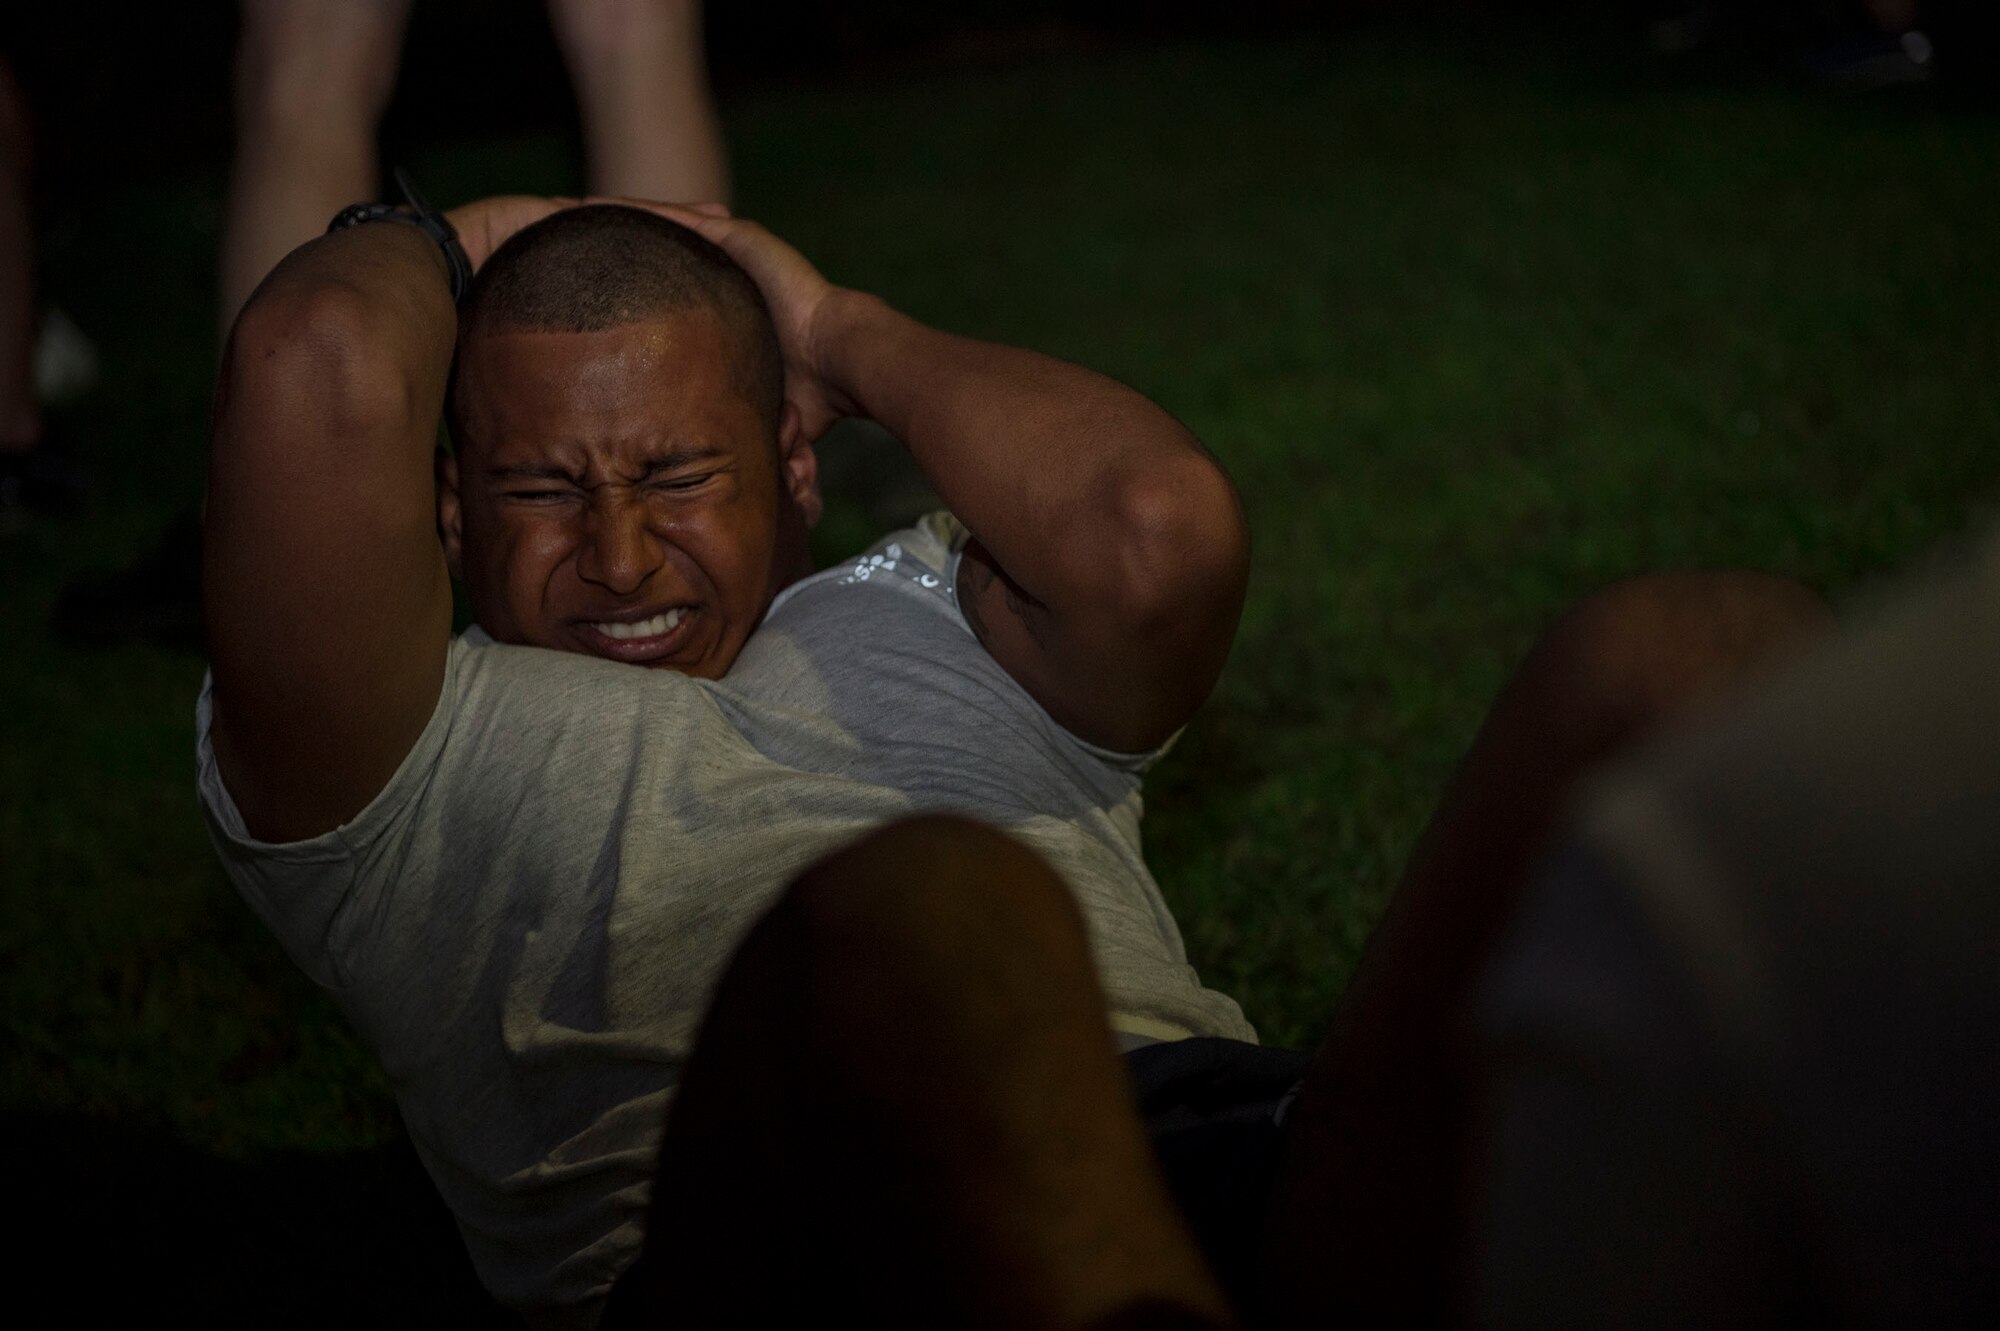 Airman 1st Class Jonathan Webster, 9th Air Support Operations Squadron Tactical Air Control Party specialist, from Fort Hood, Texas, performs sit ups during a Pre-Ranger Assessment Course, Aug. 24, 2018, at Moody Air Force Base, Ga. Moody’s 93d Air Ground Operations Wing hosted the three-day assessment which challenged approximately 20 Airmen from the 93d AGOW and 23d Wing on their physical fitness, land navigation skills, leadership qualities, water confidence and academic and tactical abilities under duress. The evaluation is designed to determine whether Airmen are ready to attend the Air Force Ranger Assessment Course held at Fort Bliss, Texas. (U.S. Air Force photo by Senior Airman Greg Nash)